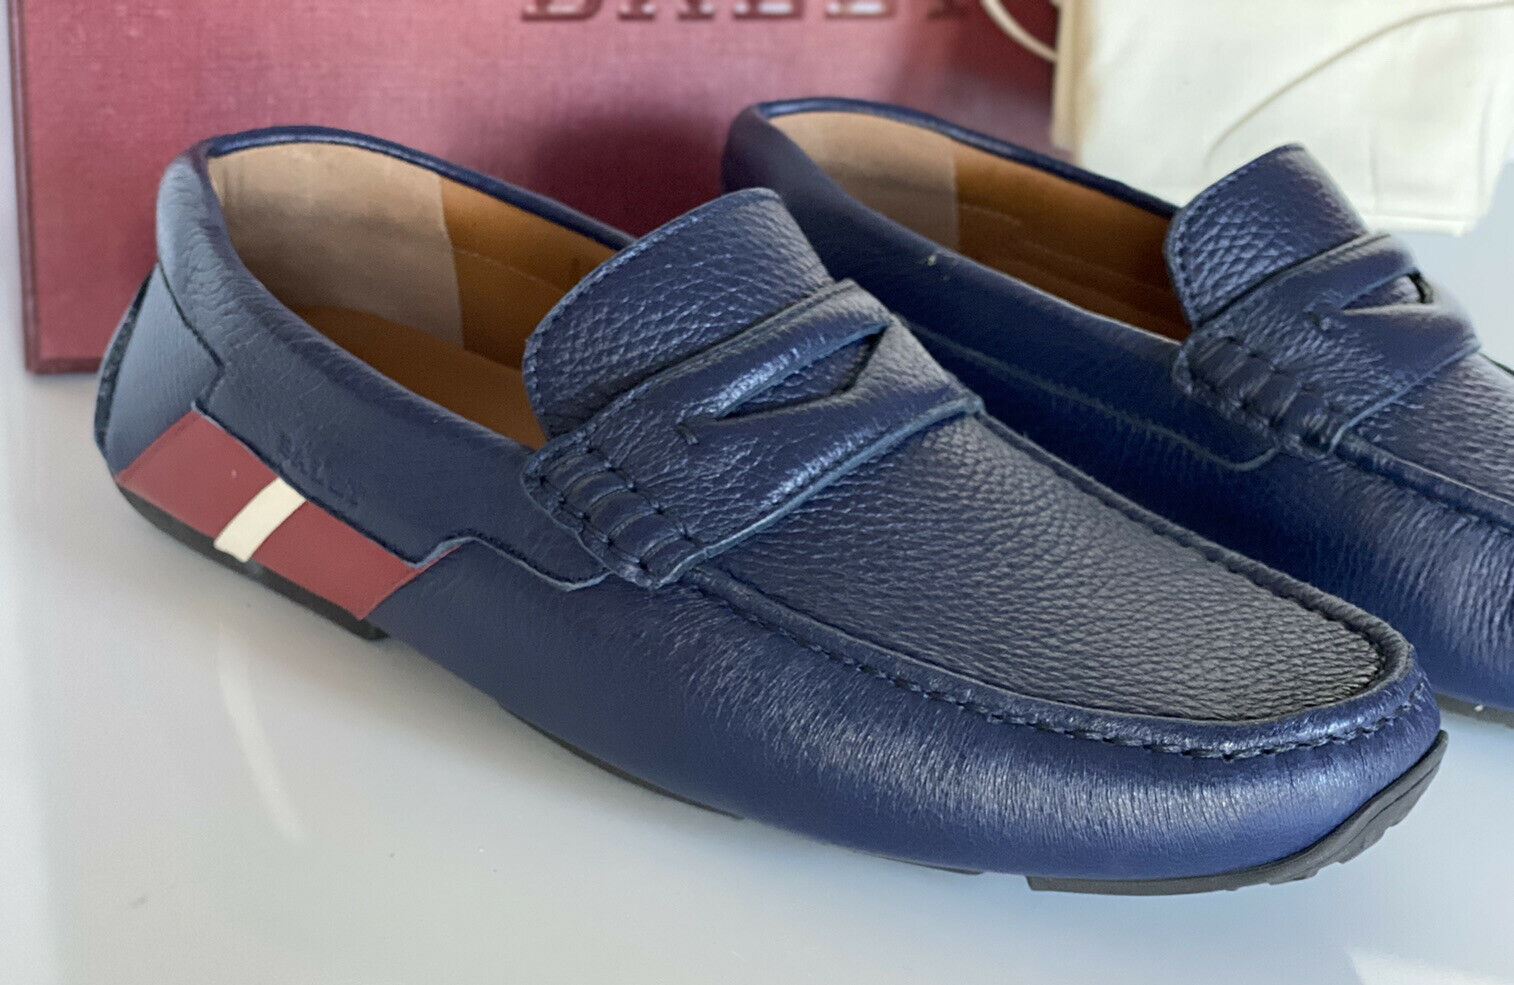 NIB Bally Mens Bovine Grained Leather Driver Loafers Shoes Blue 8 US IT 6233858